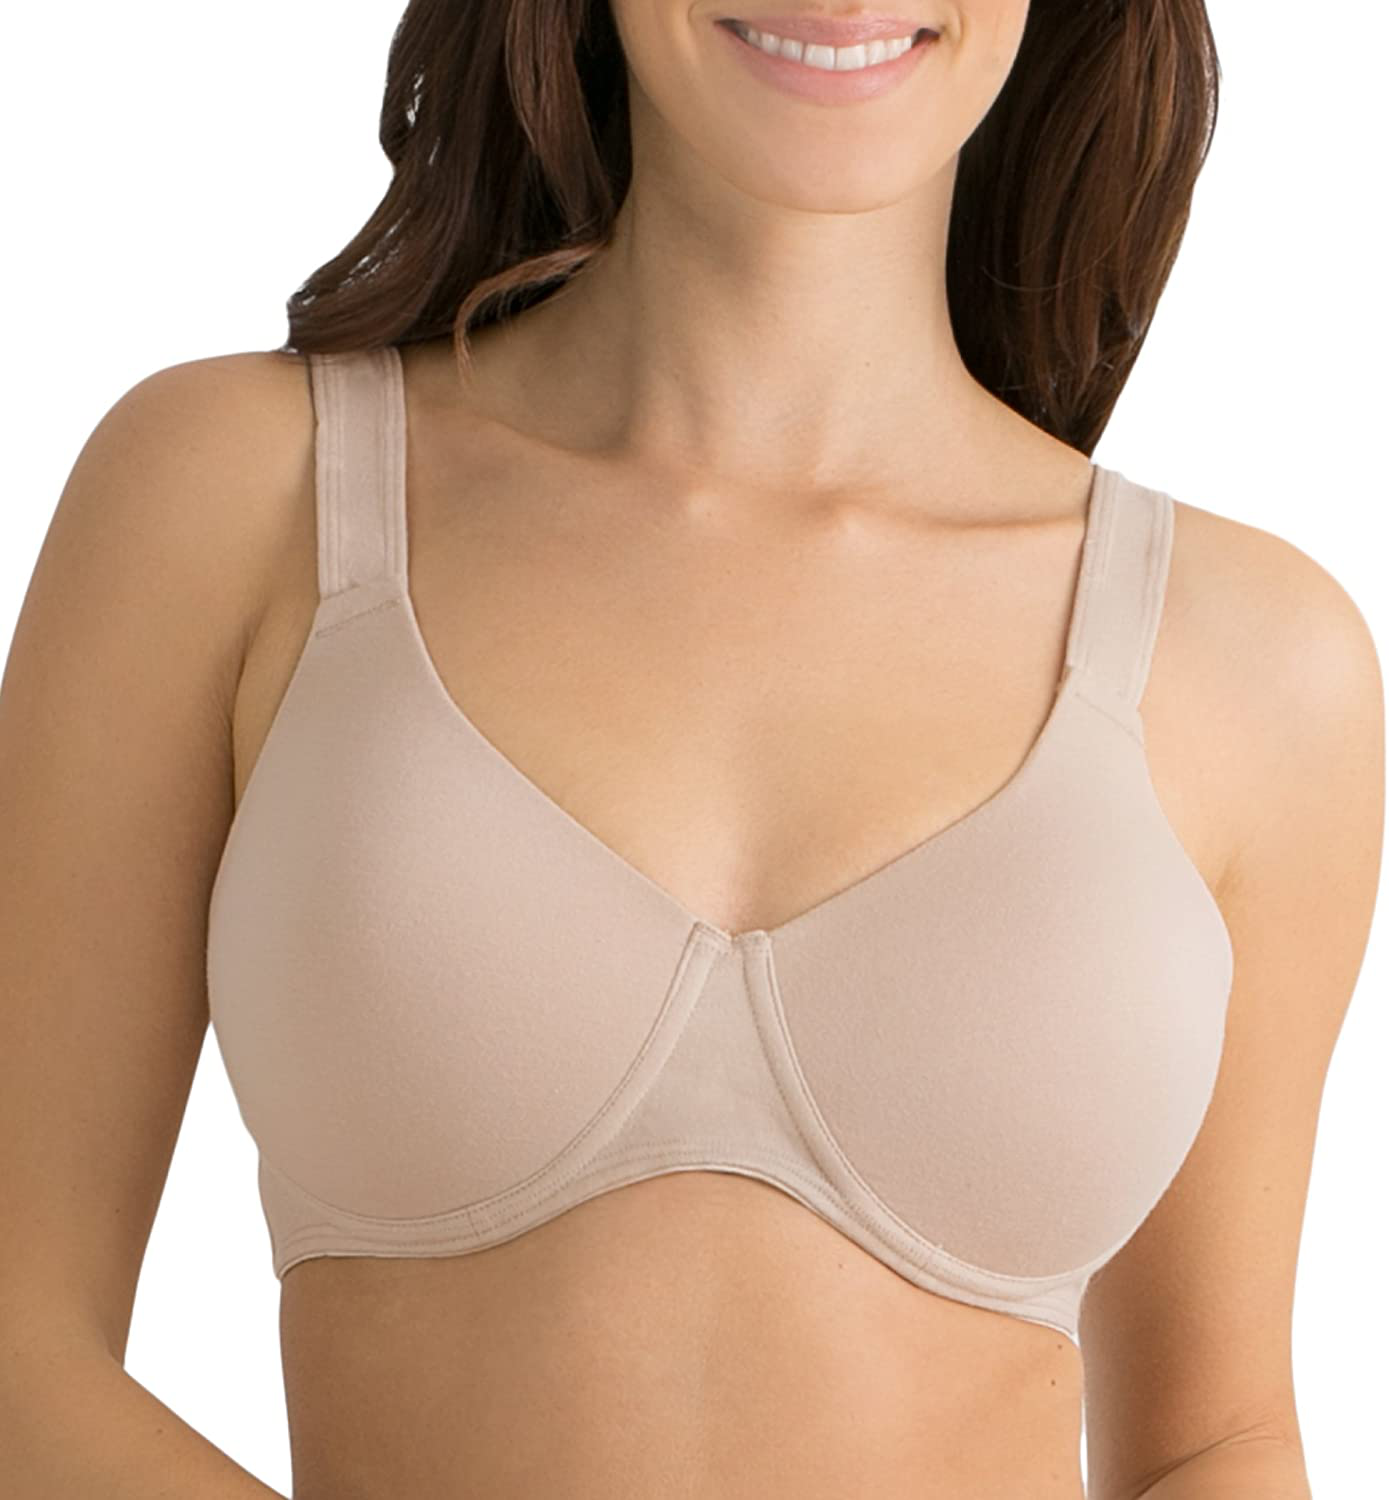 Fruit of the Loom womens Seamed Soft Cup Wirefree Cotton Bra